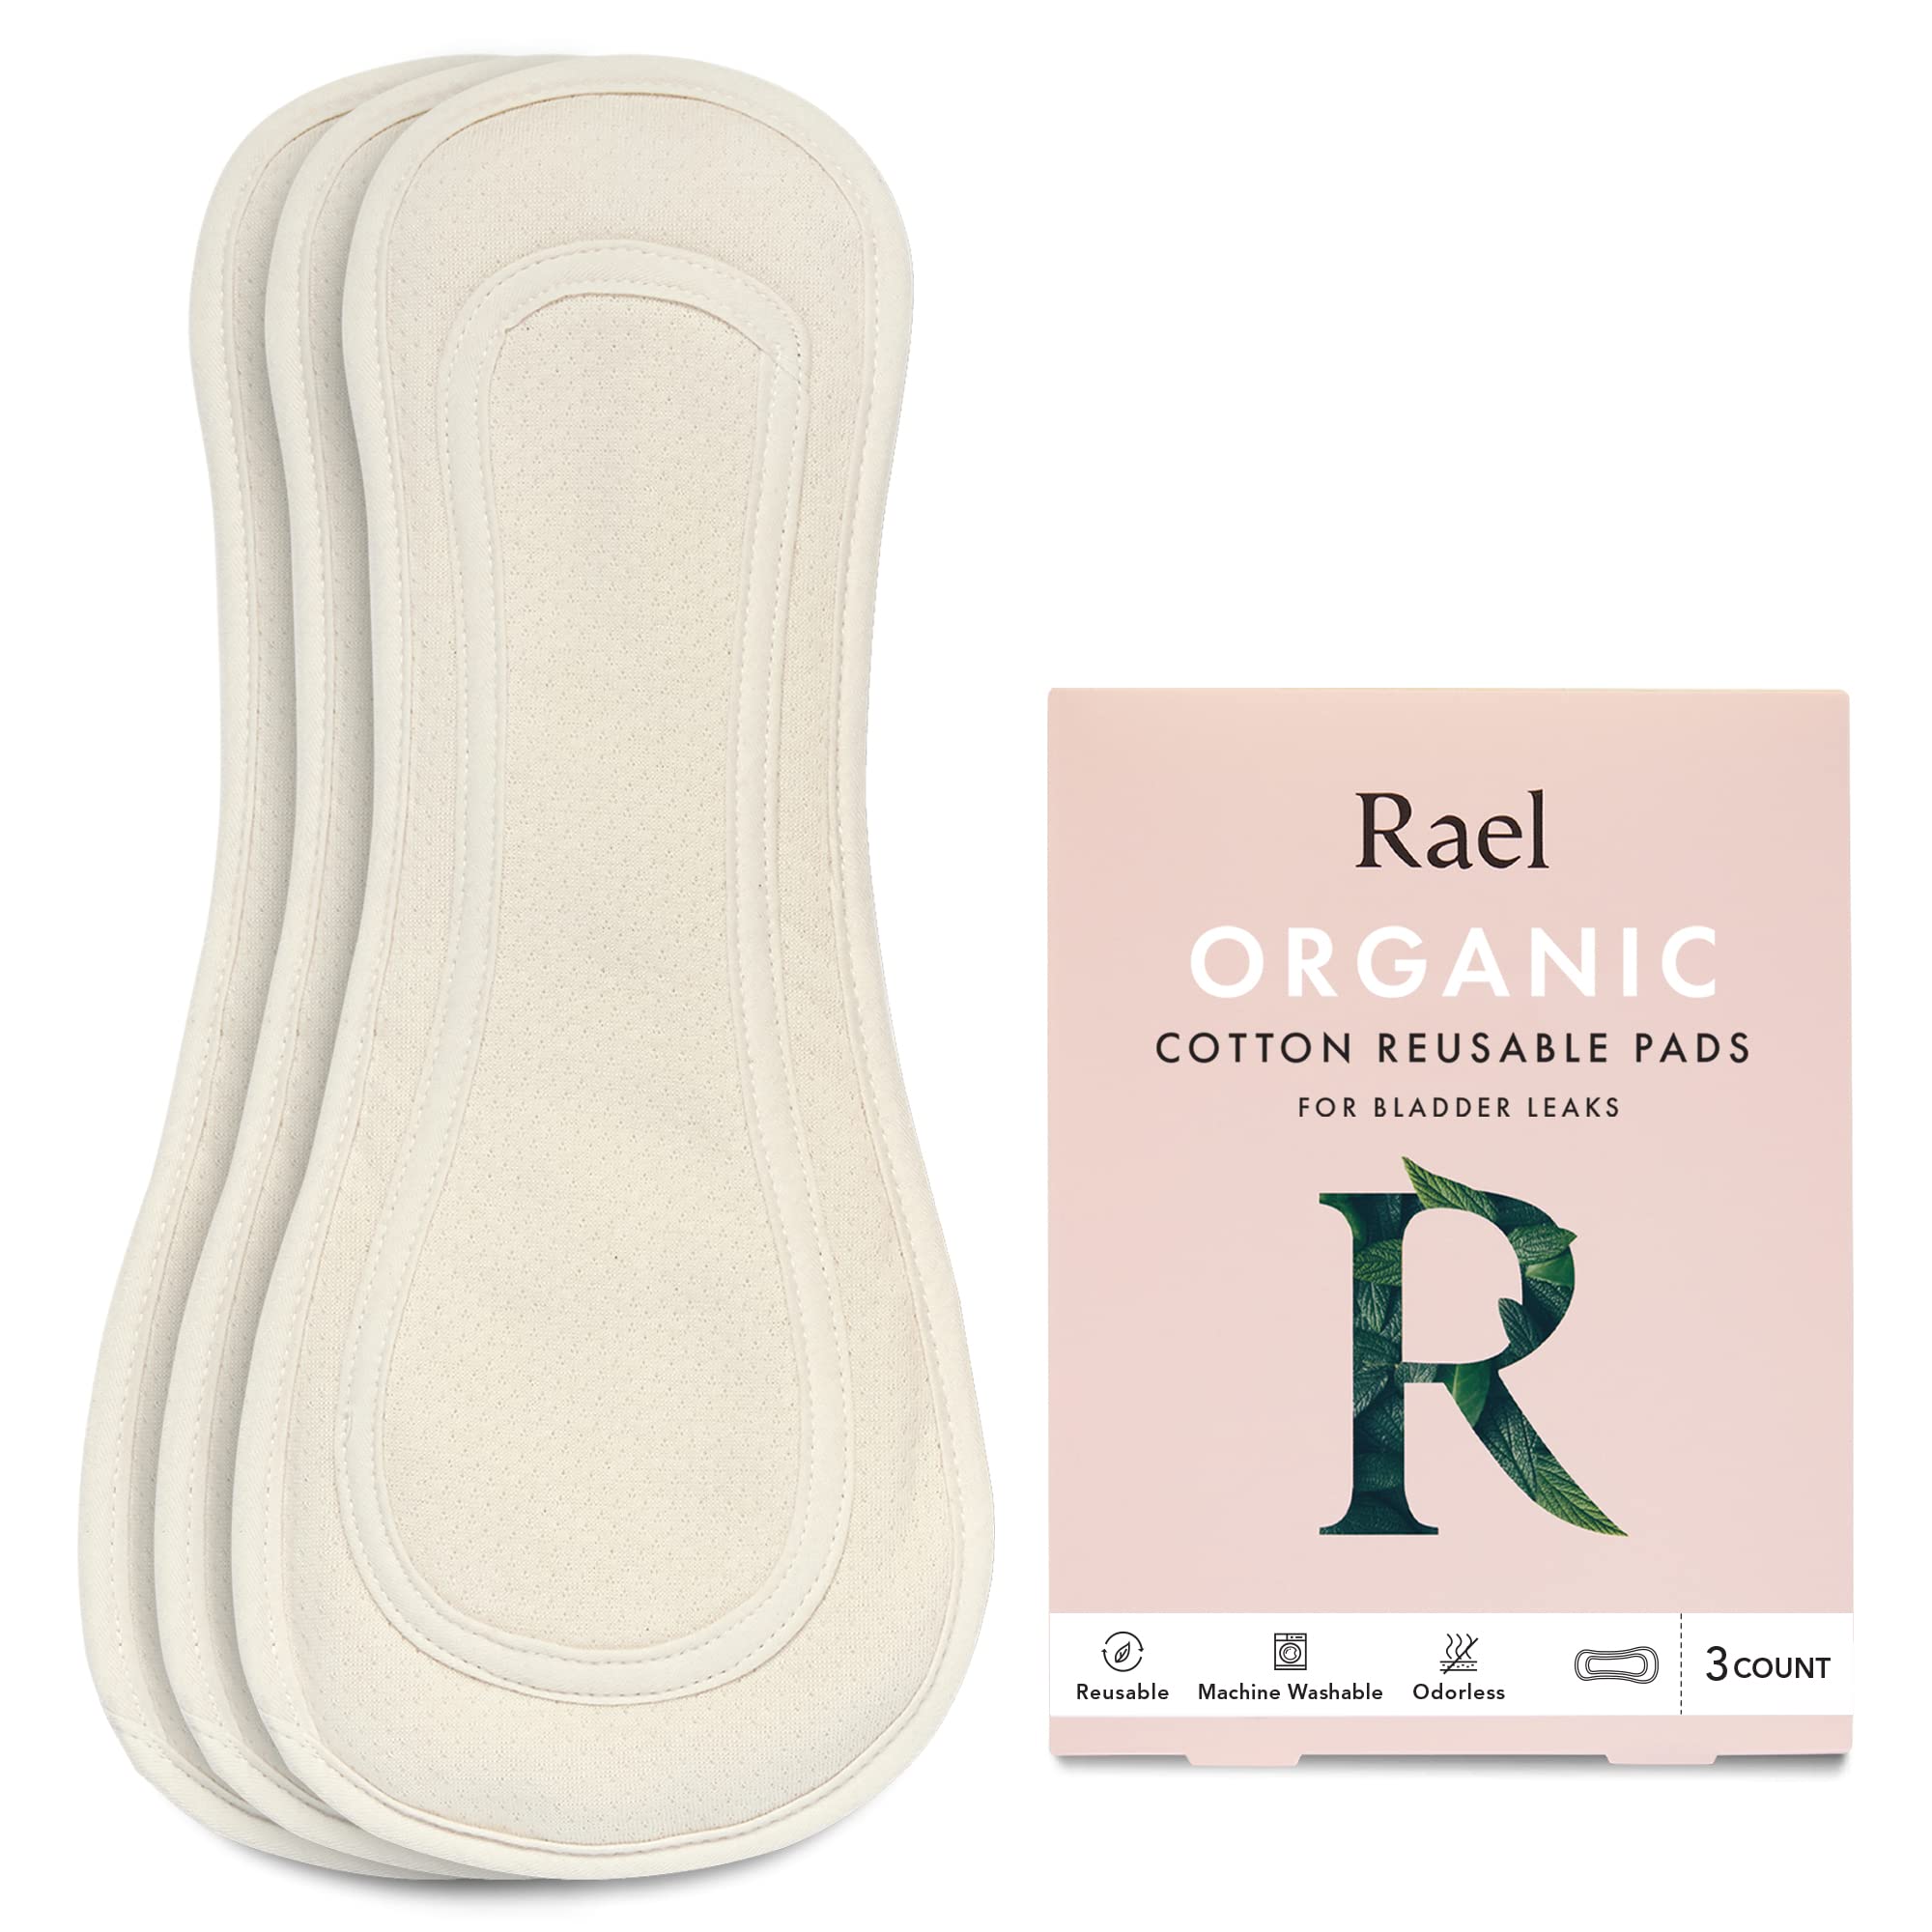 Rael Reusable Panty Liners Menstrual, Organic Cotton Cover (5 count, White)